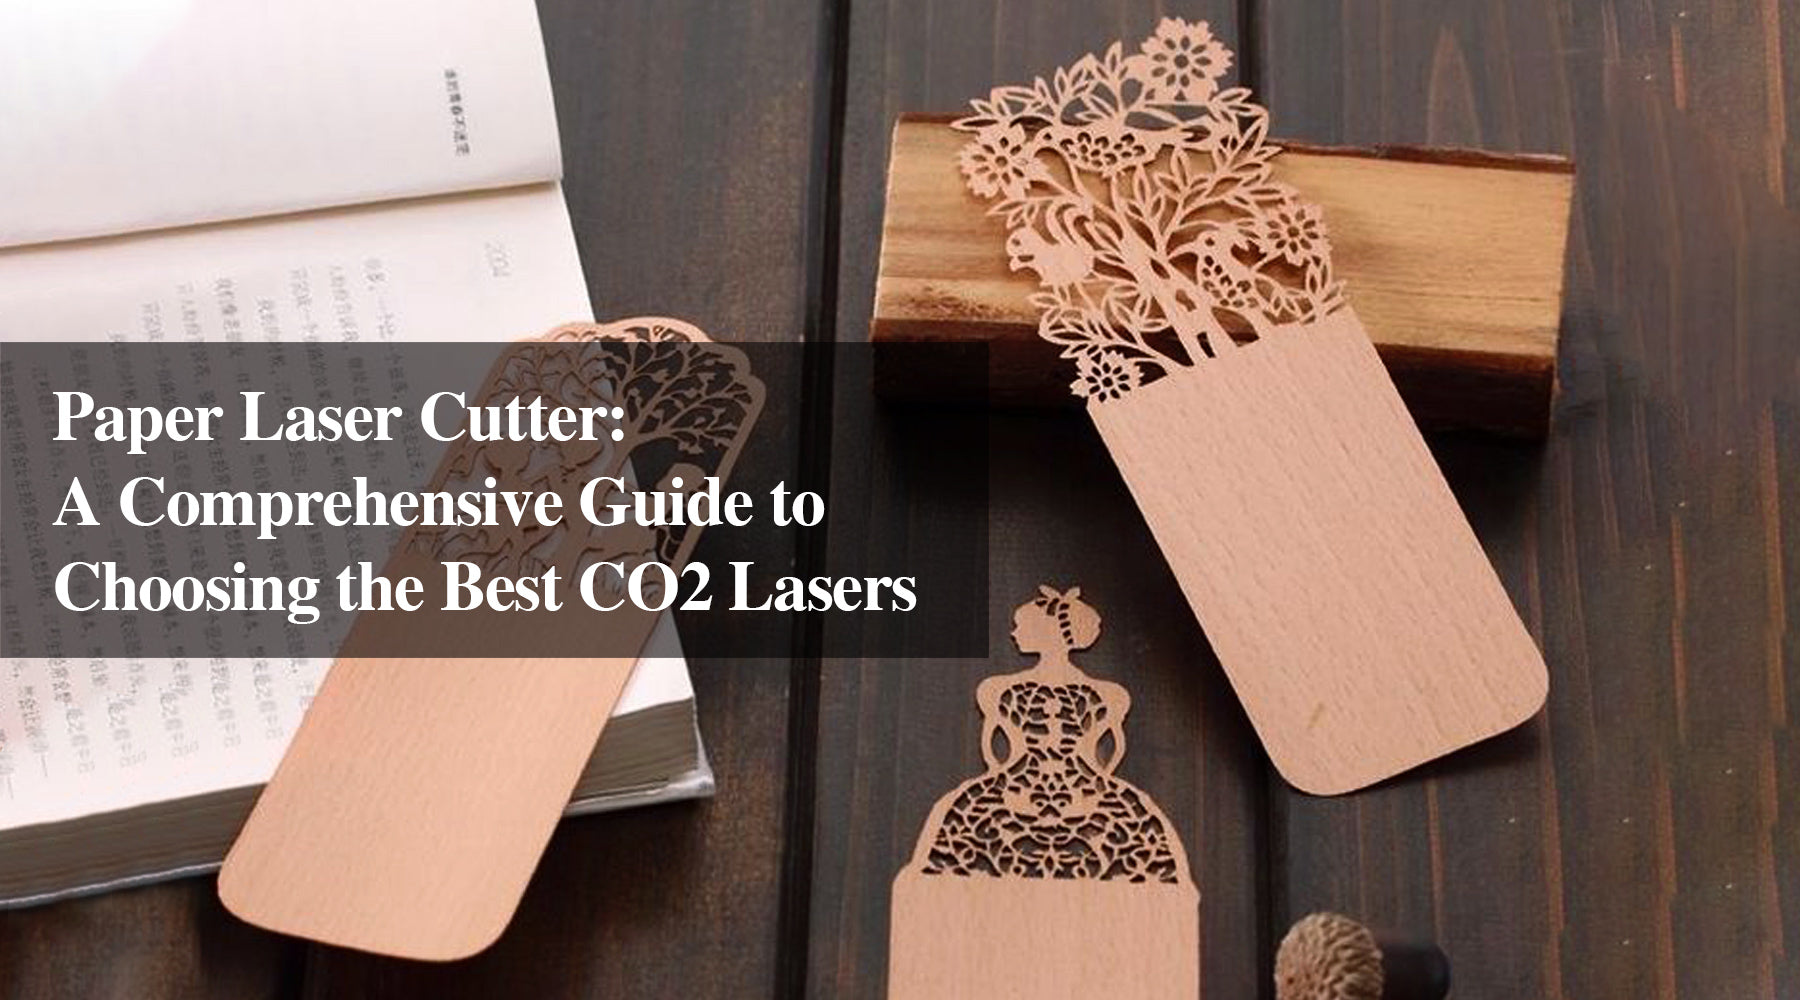 Paper Laser Cutter: A Comprehensive Guide to Choosing the Best CO2 Lasers